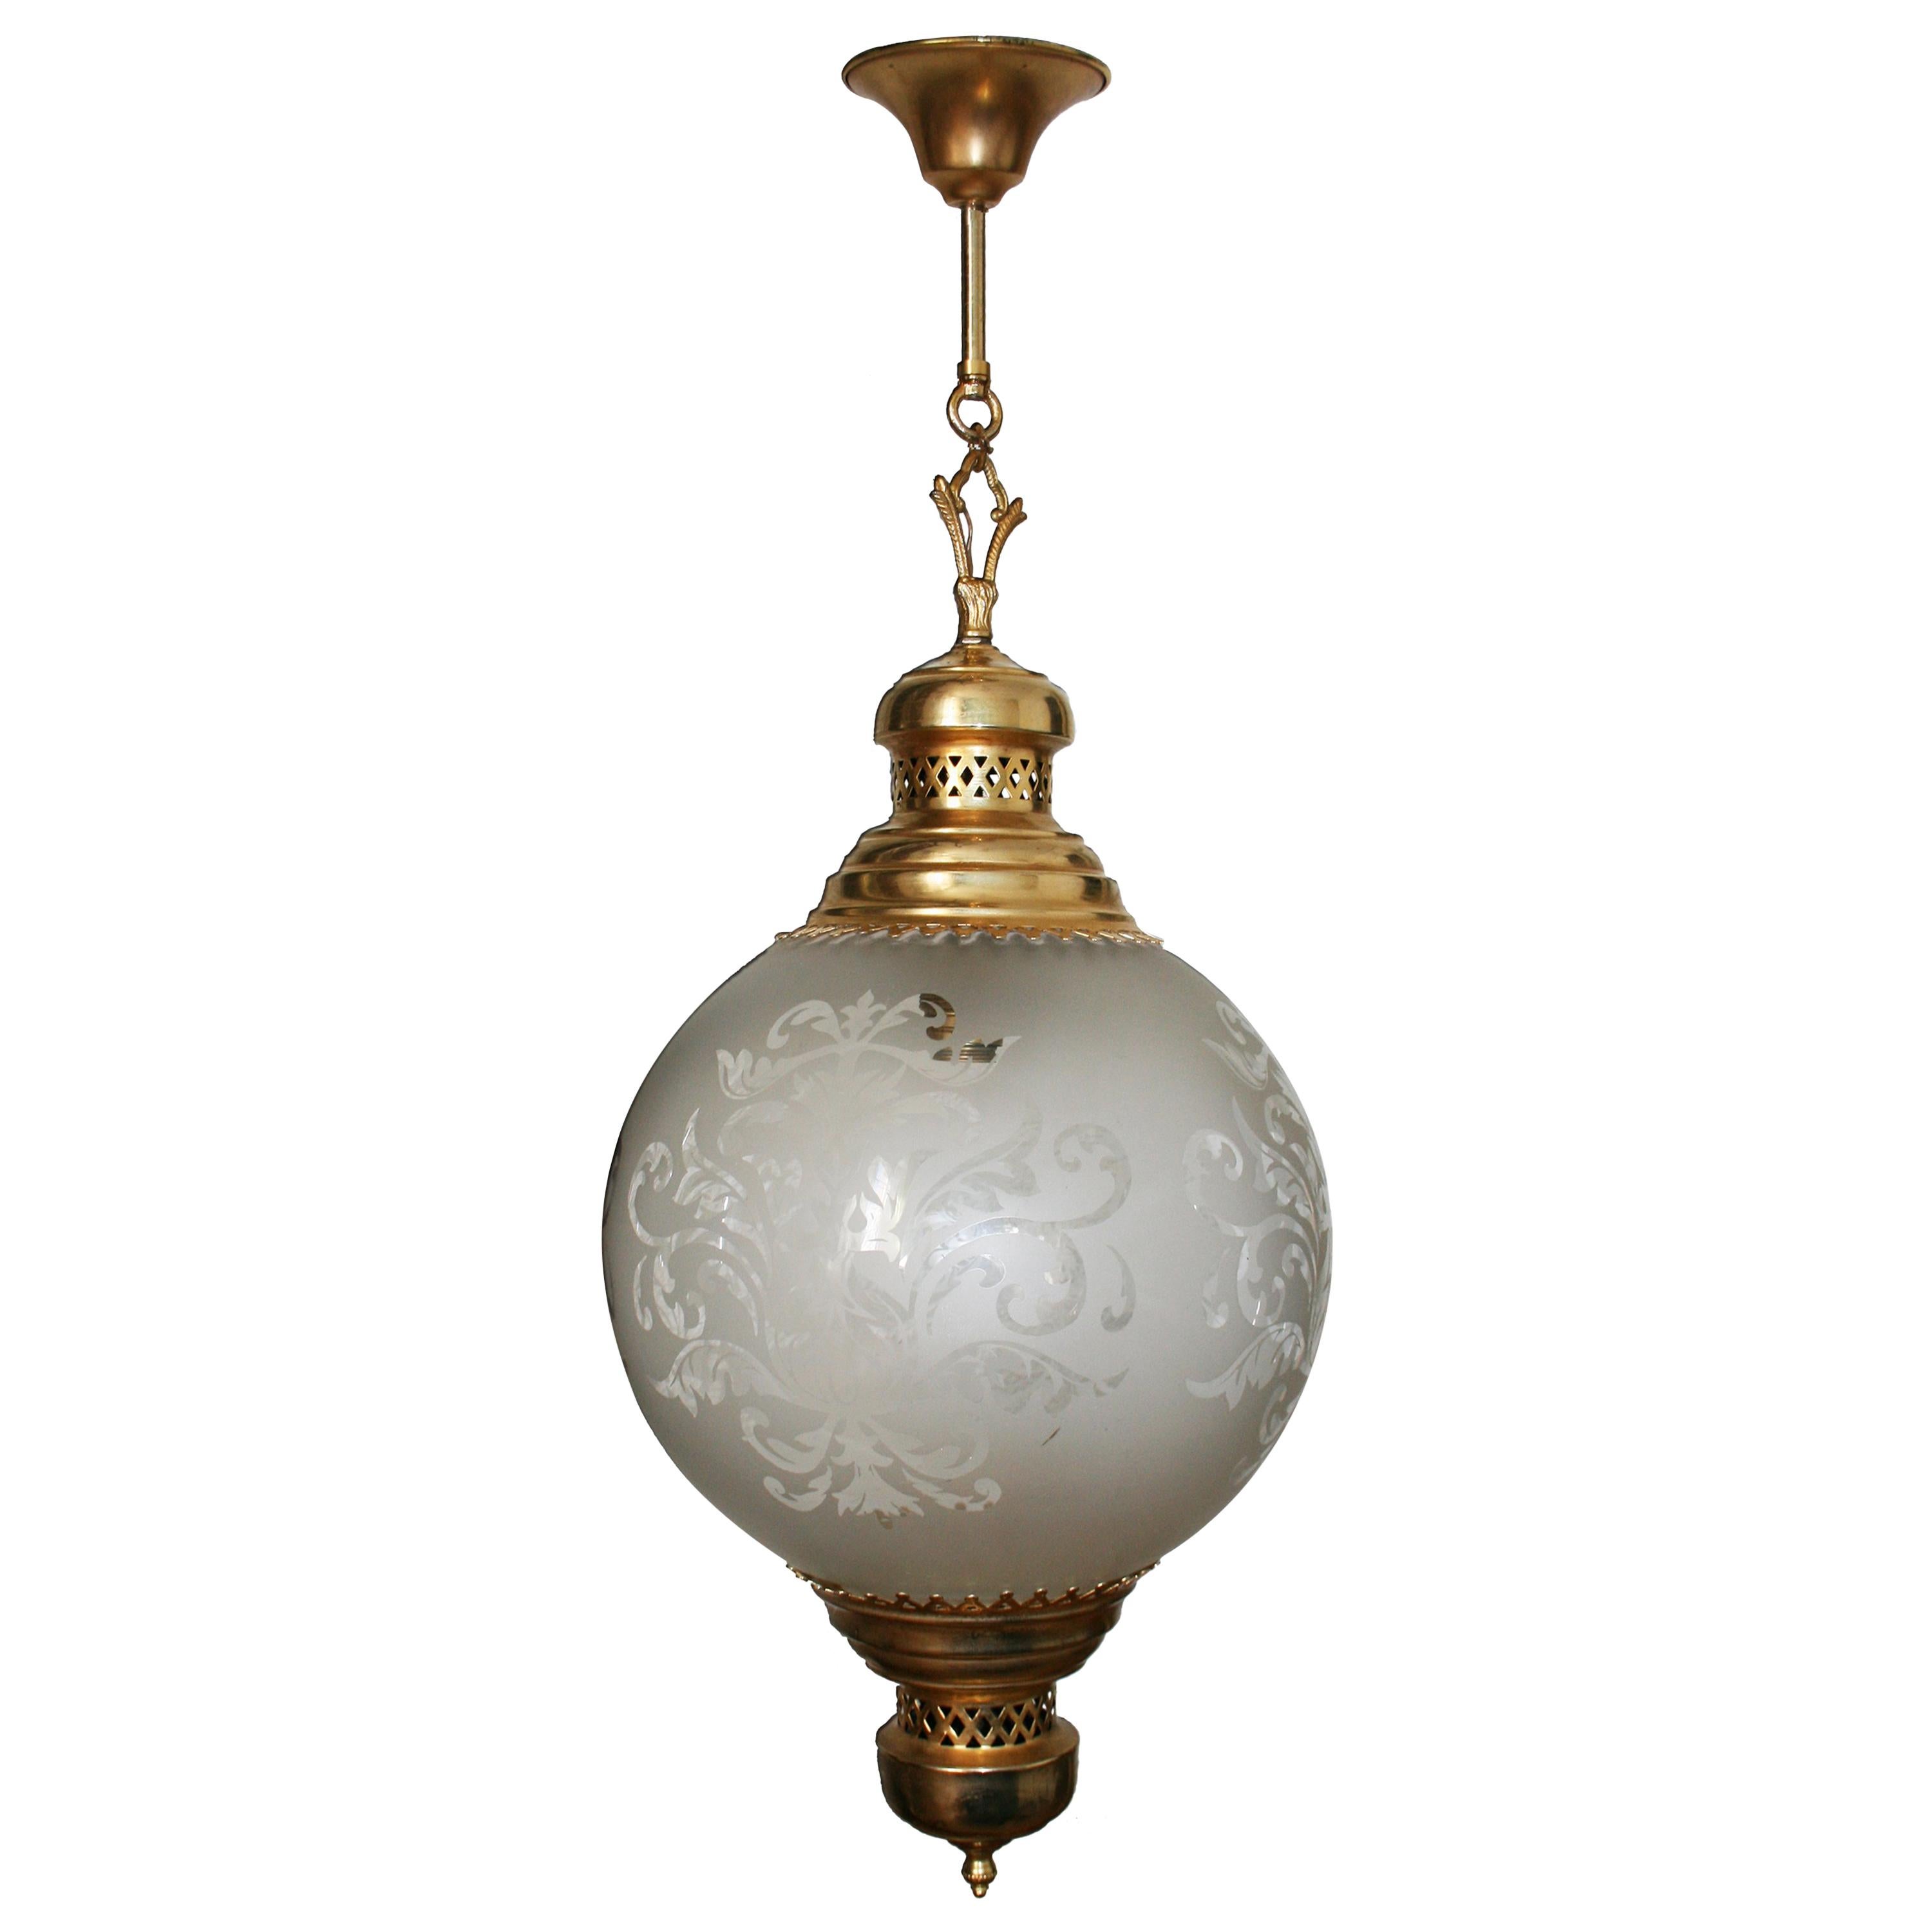 Midcentury Brass Lantern and Engraved Crystal Globe, Italy, 1950s